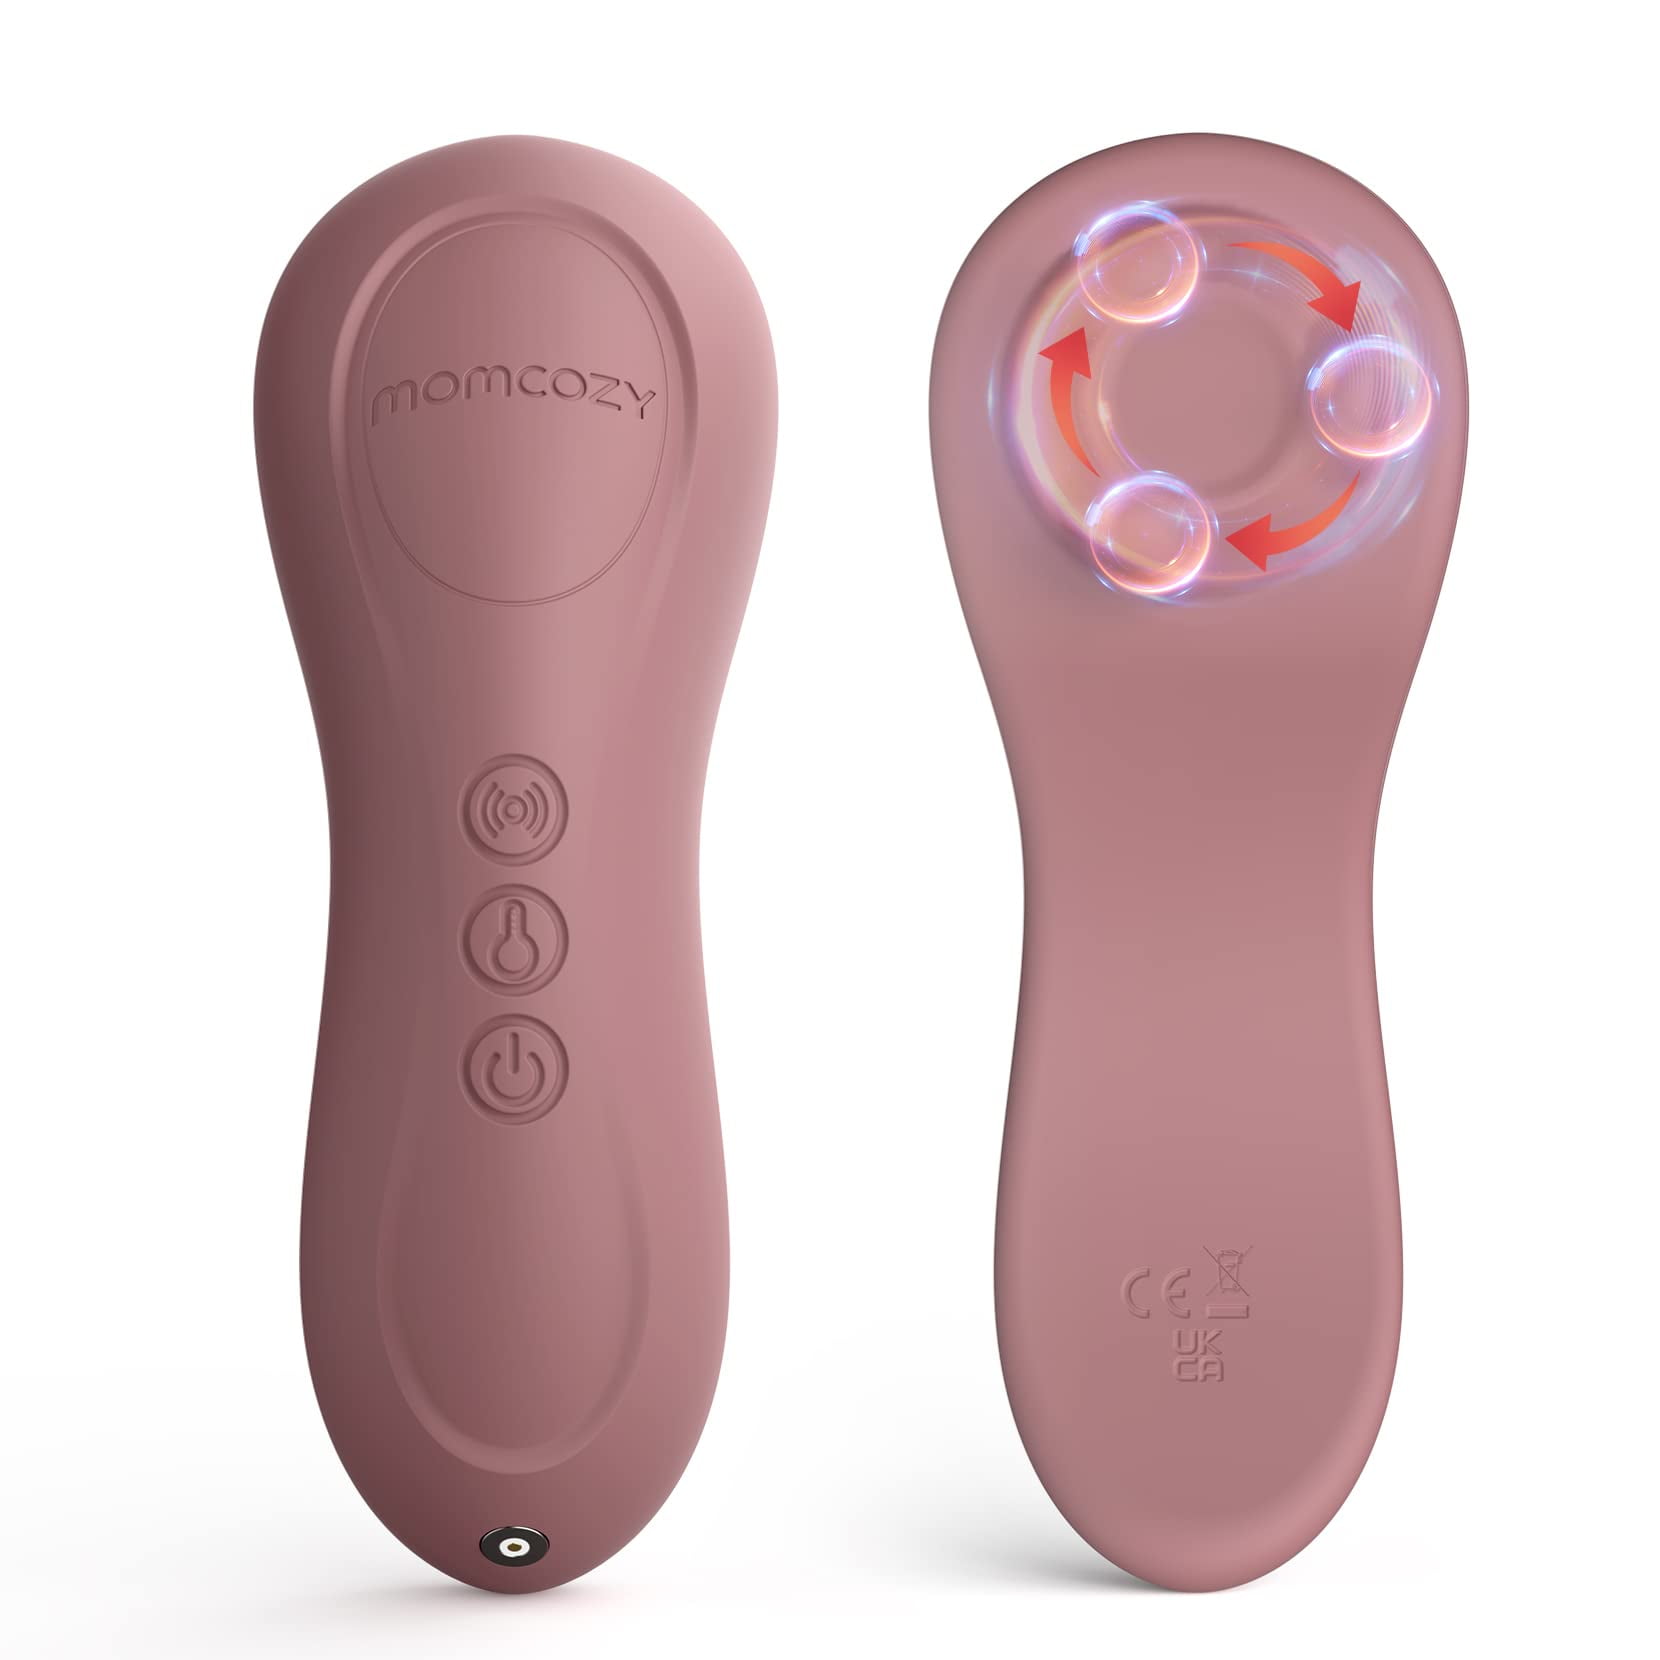 MomPrize Warming Lactation Massager for Breastfeeding - Breast